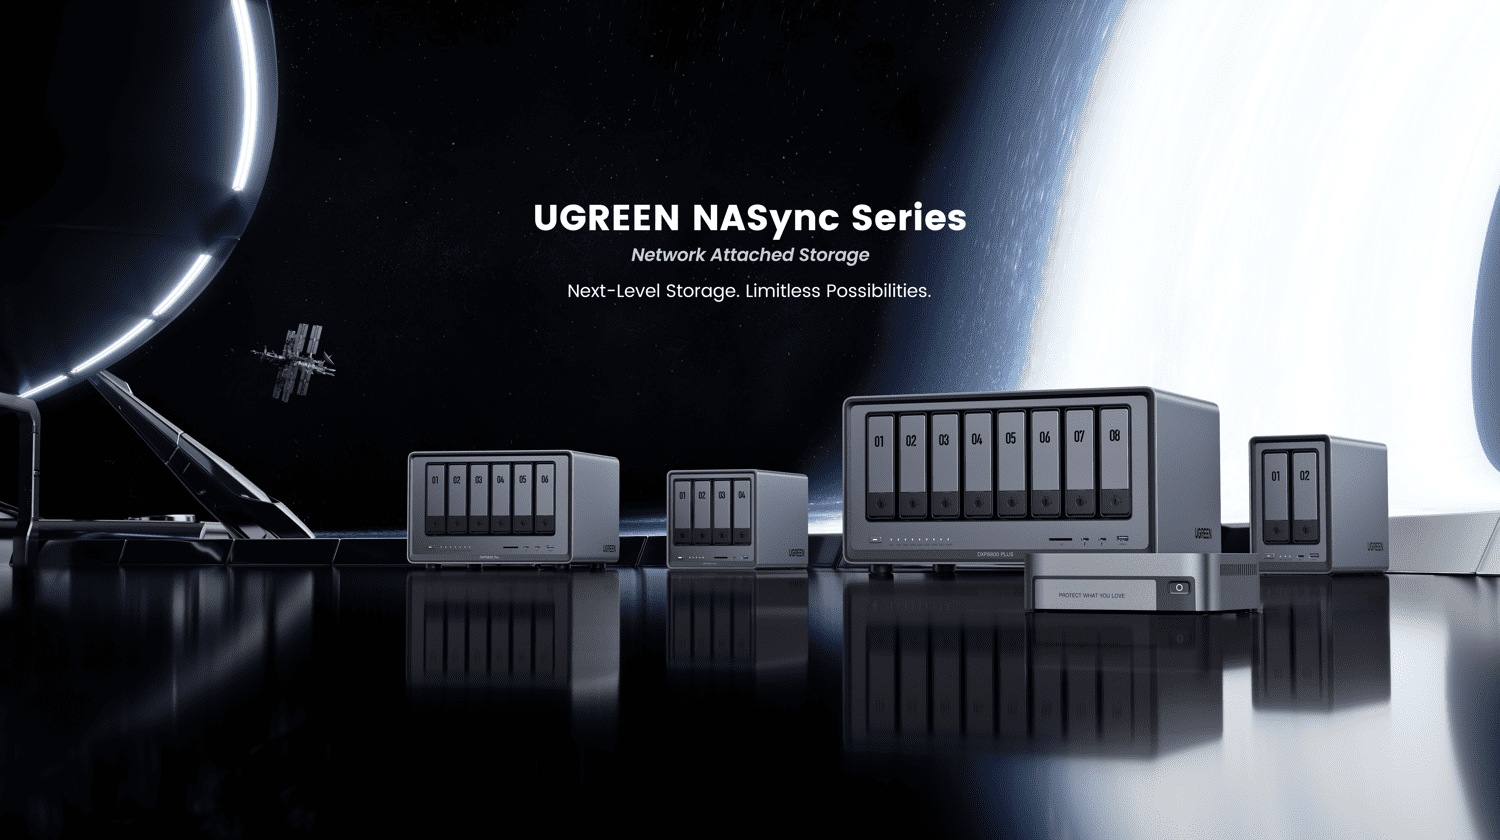 UGREEN NASync Series: Top 6 Things You Need to Know